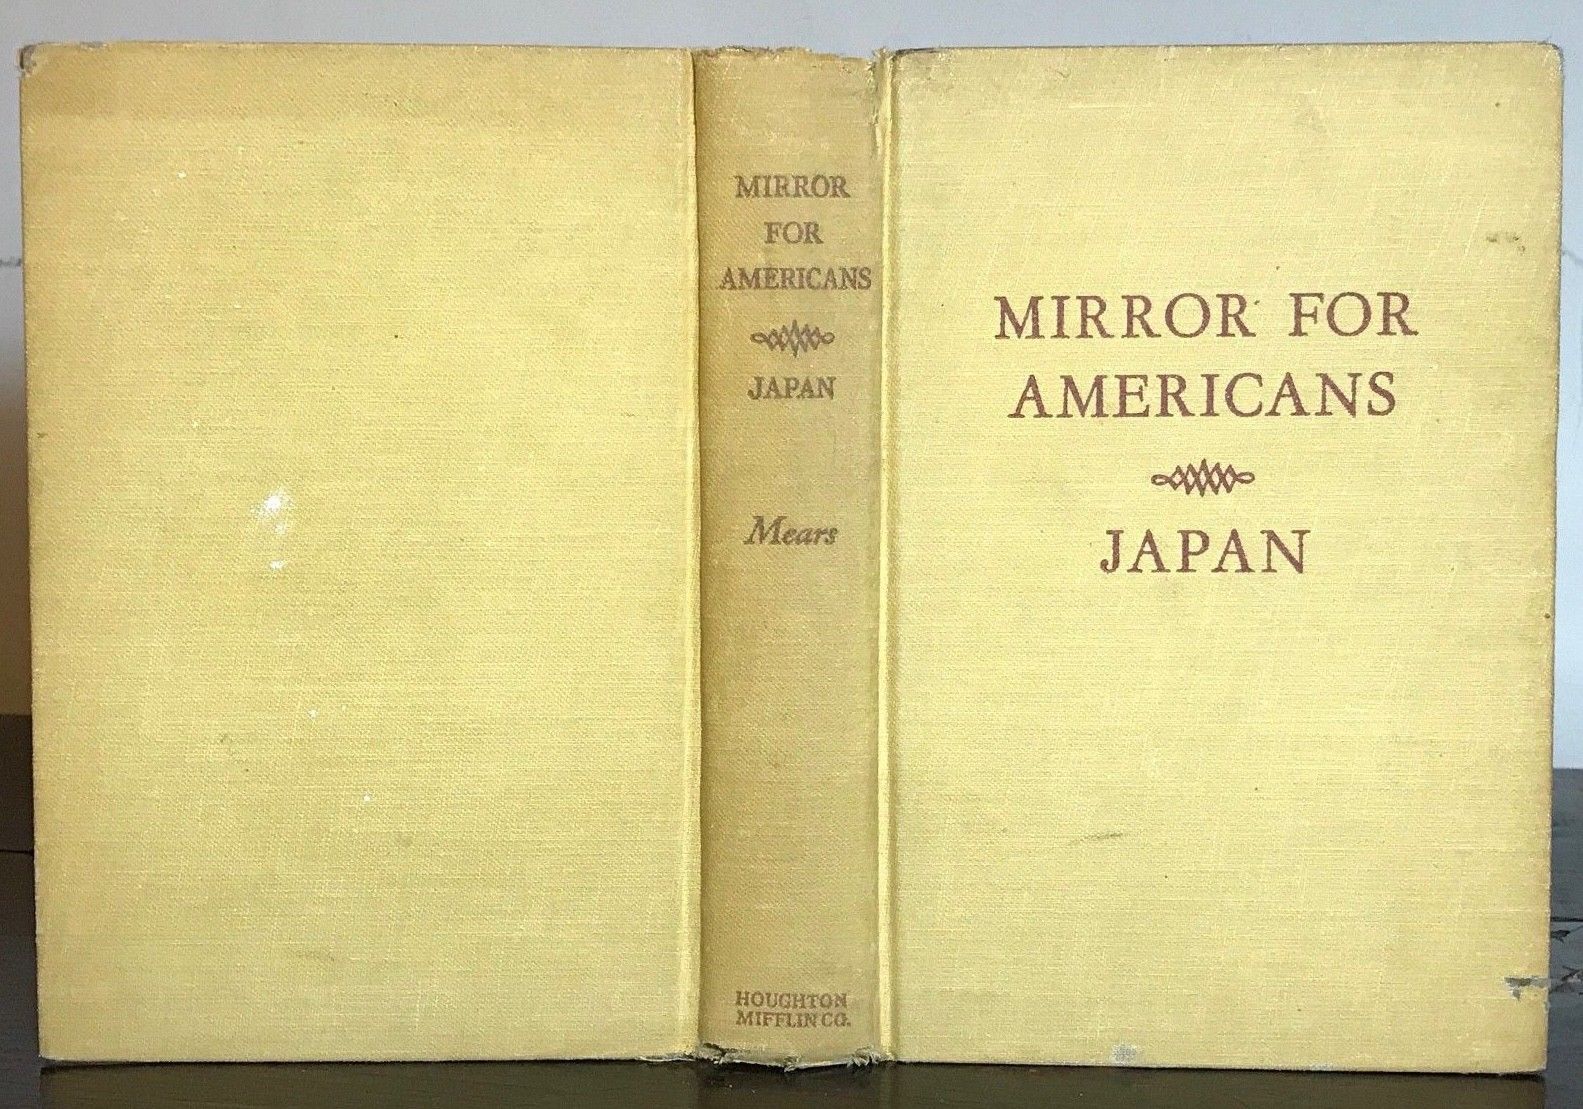 SIGNED REVIEW COPY, HELEN MEARS - MIRROR FOR AMERICANS 1st